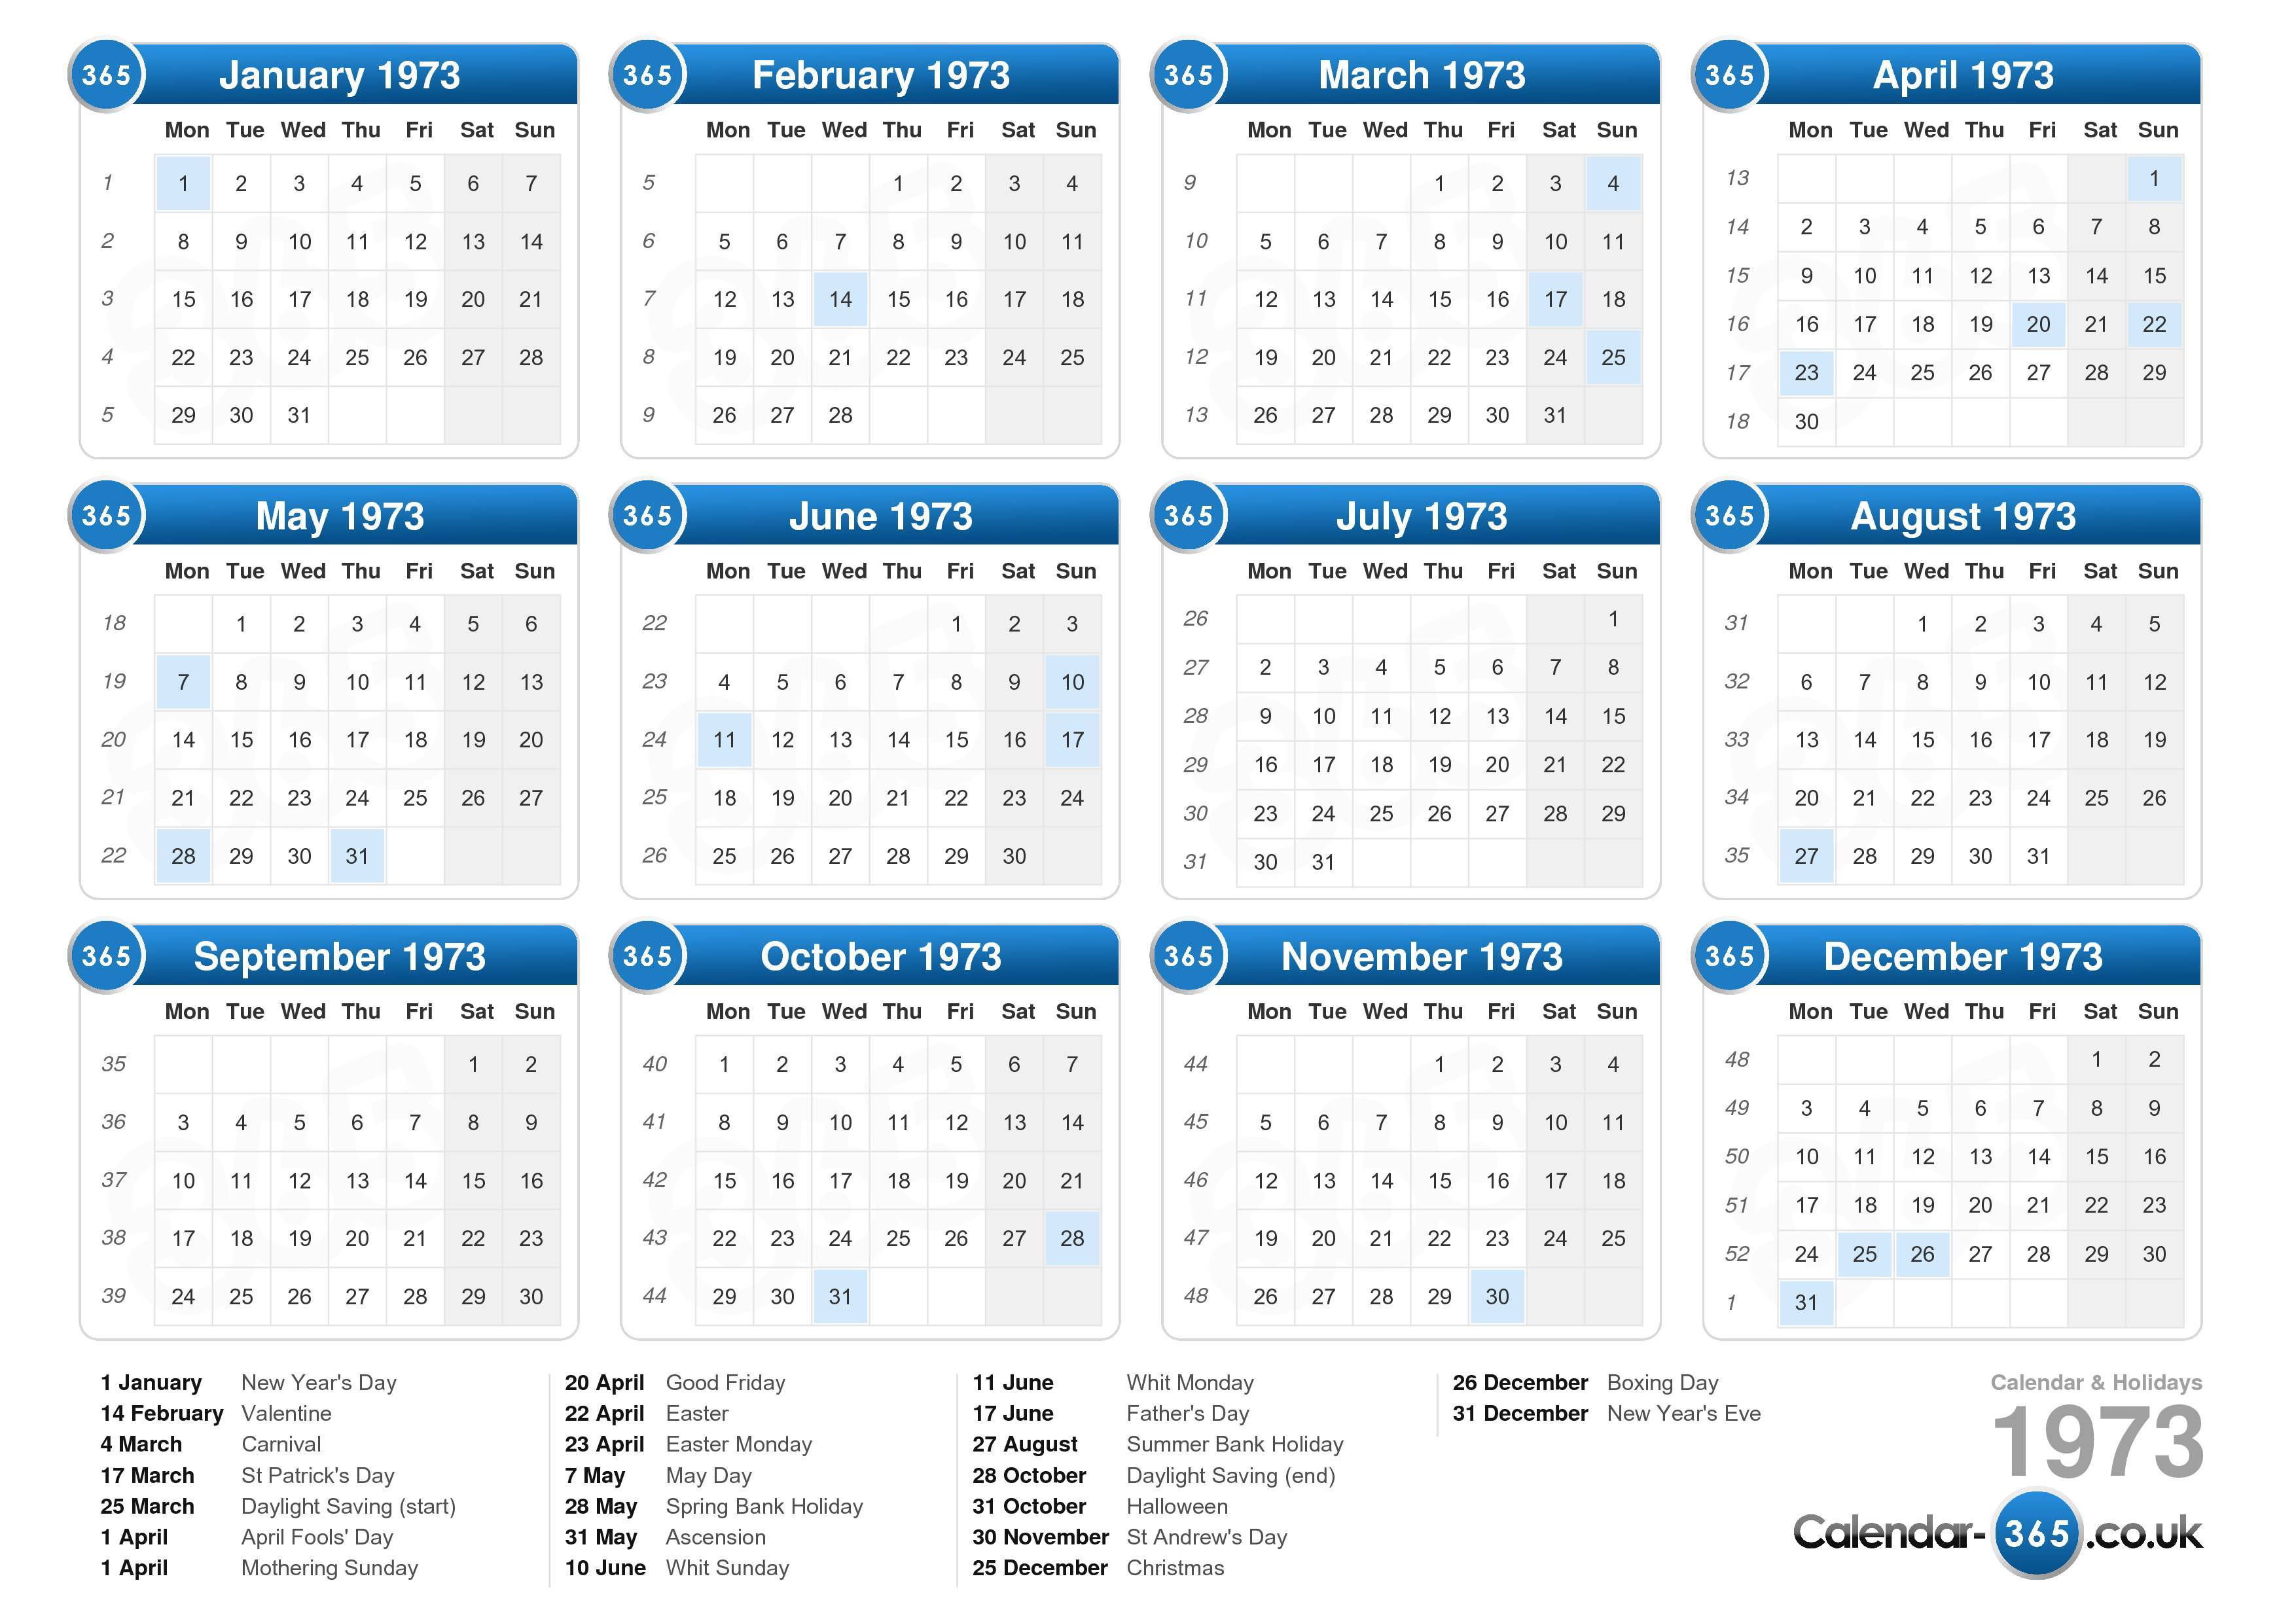 Download the Calendar 1973 with holidays . (Landscape format - 1 Page)